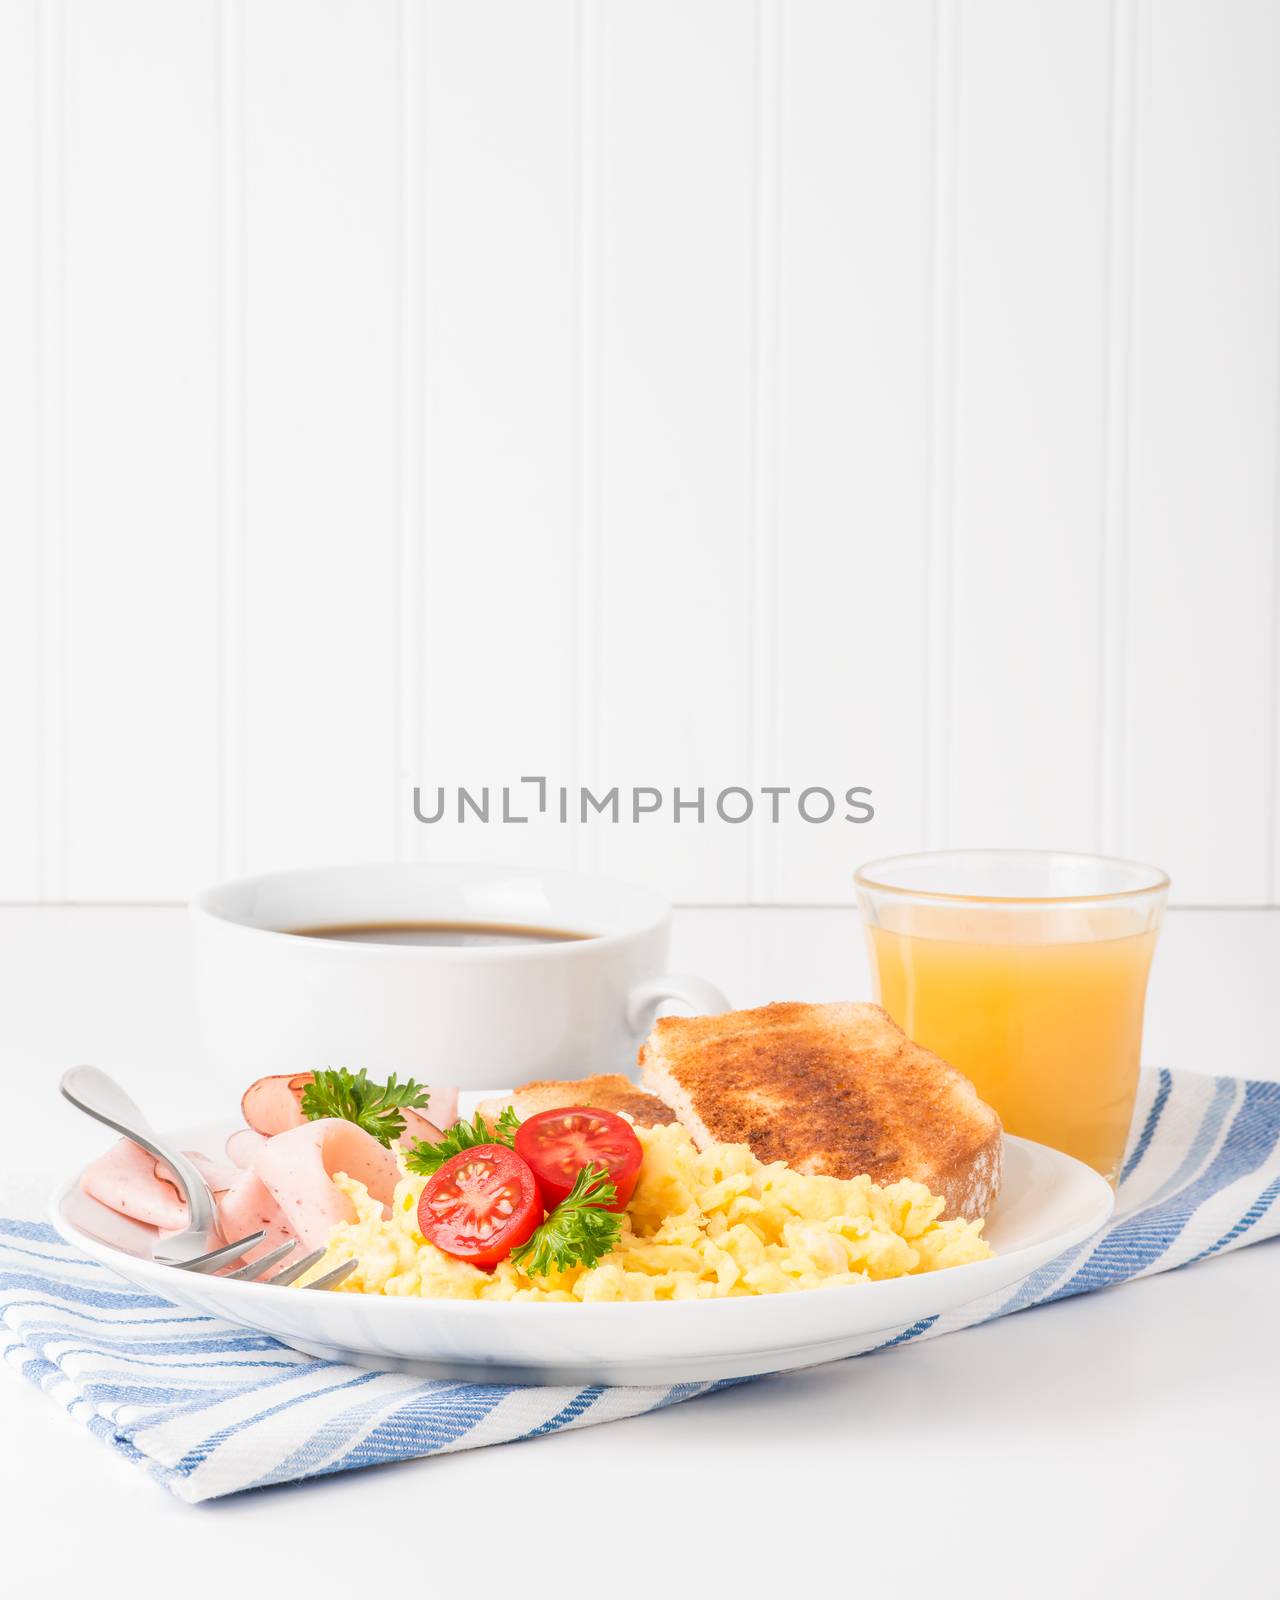 Portrait view of a plate of scrambled eggs and ham.